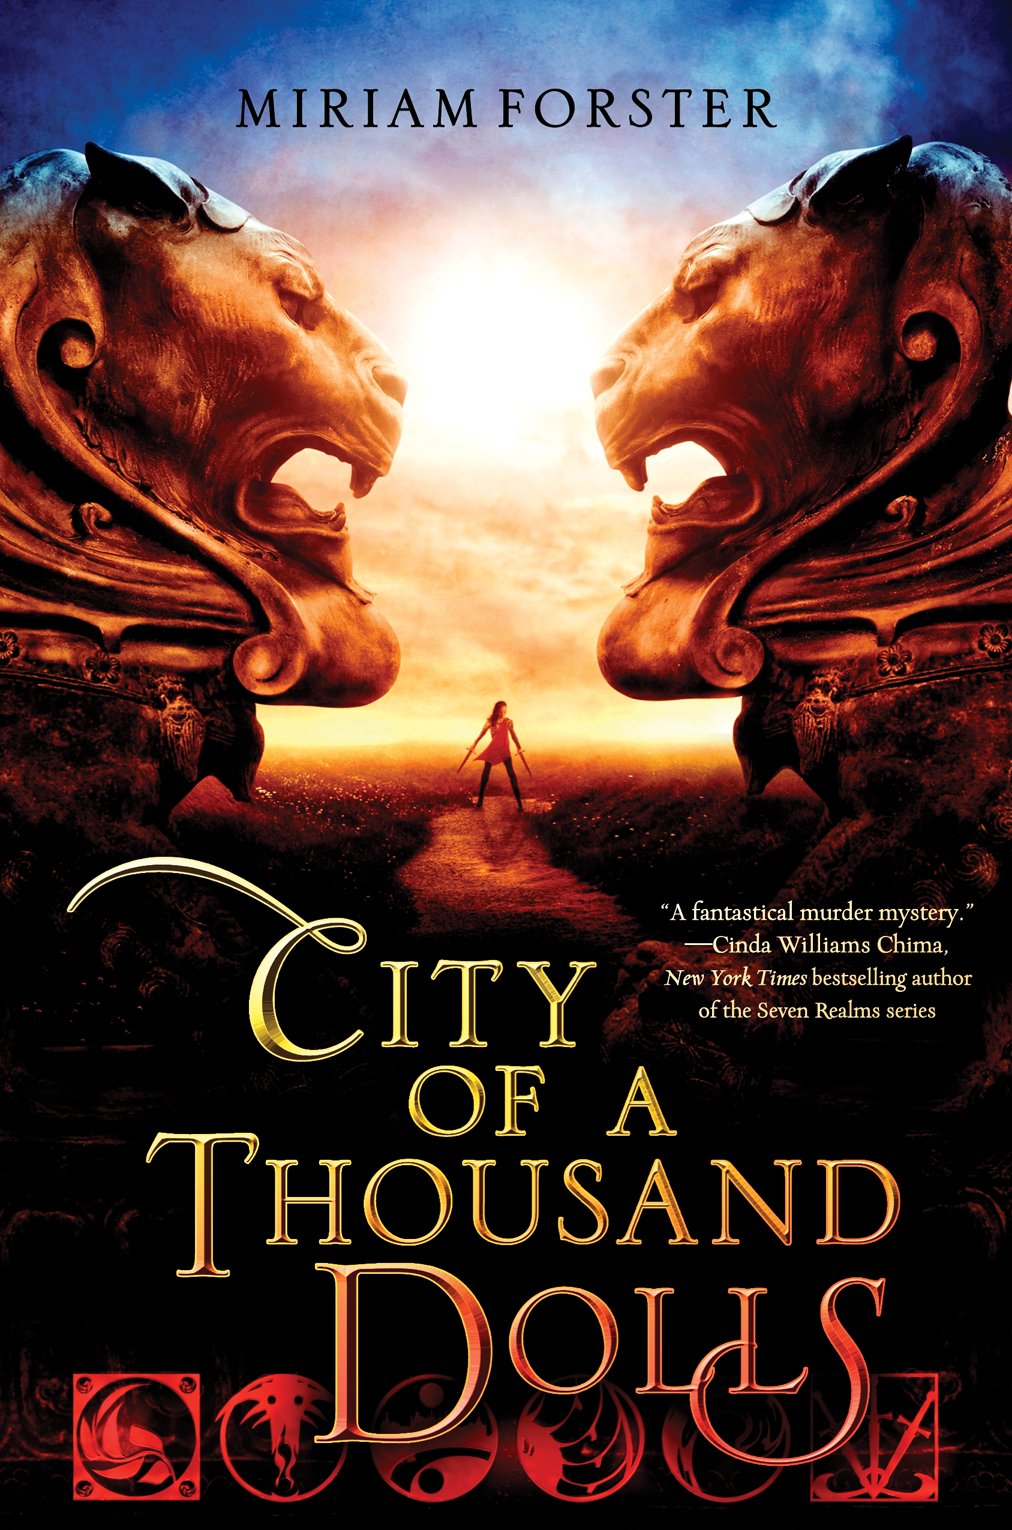 City of a Thousand Dolls book cover Mar 13 p158